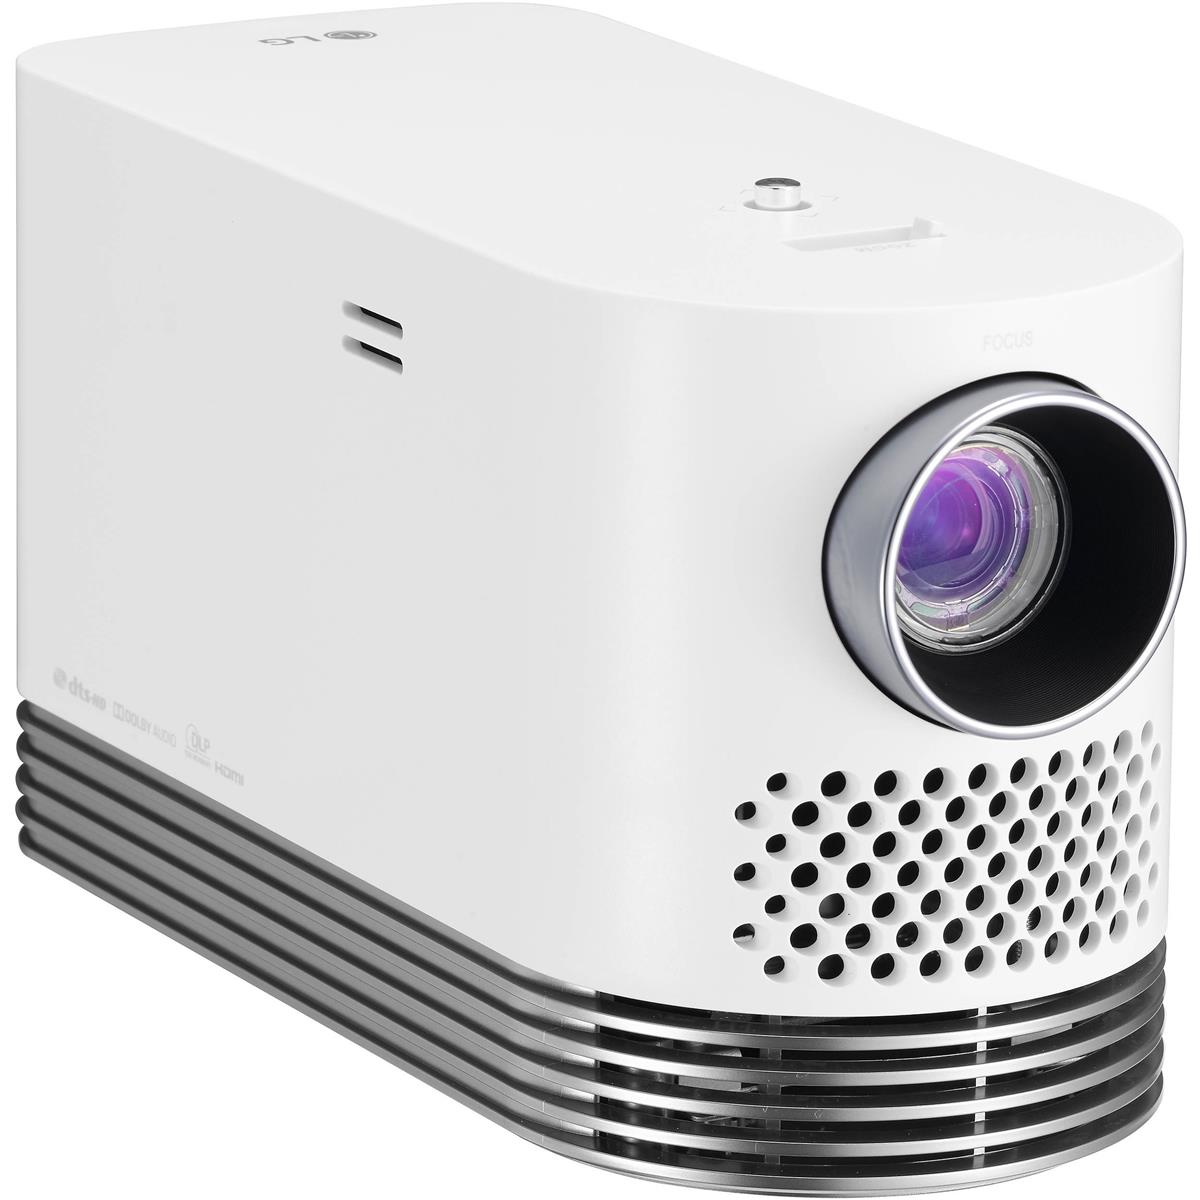 Image of LG HF80LA Laser FHD Smart Home Theater Projector